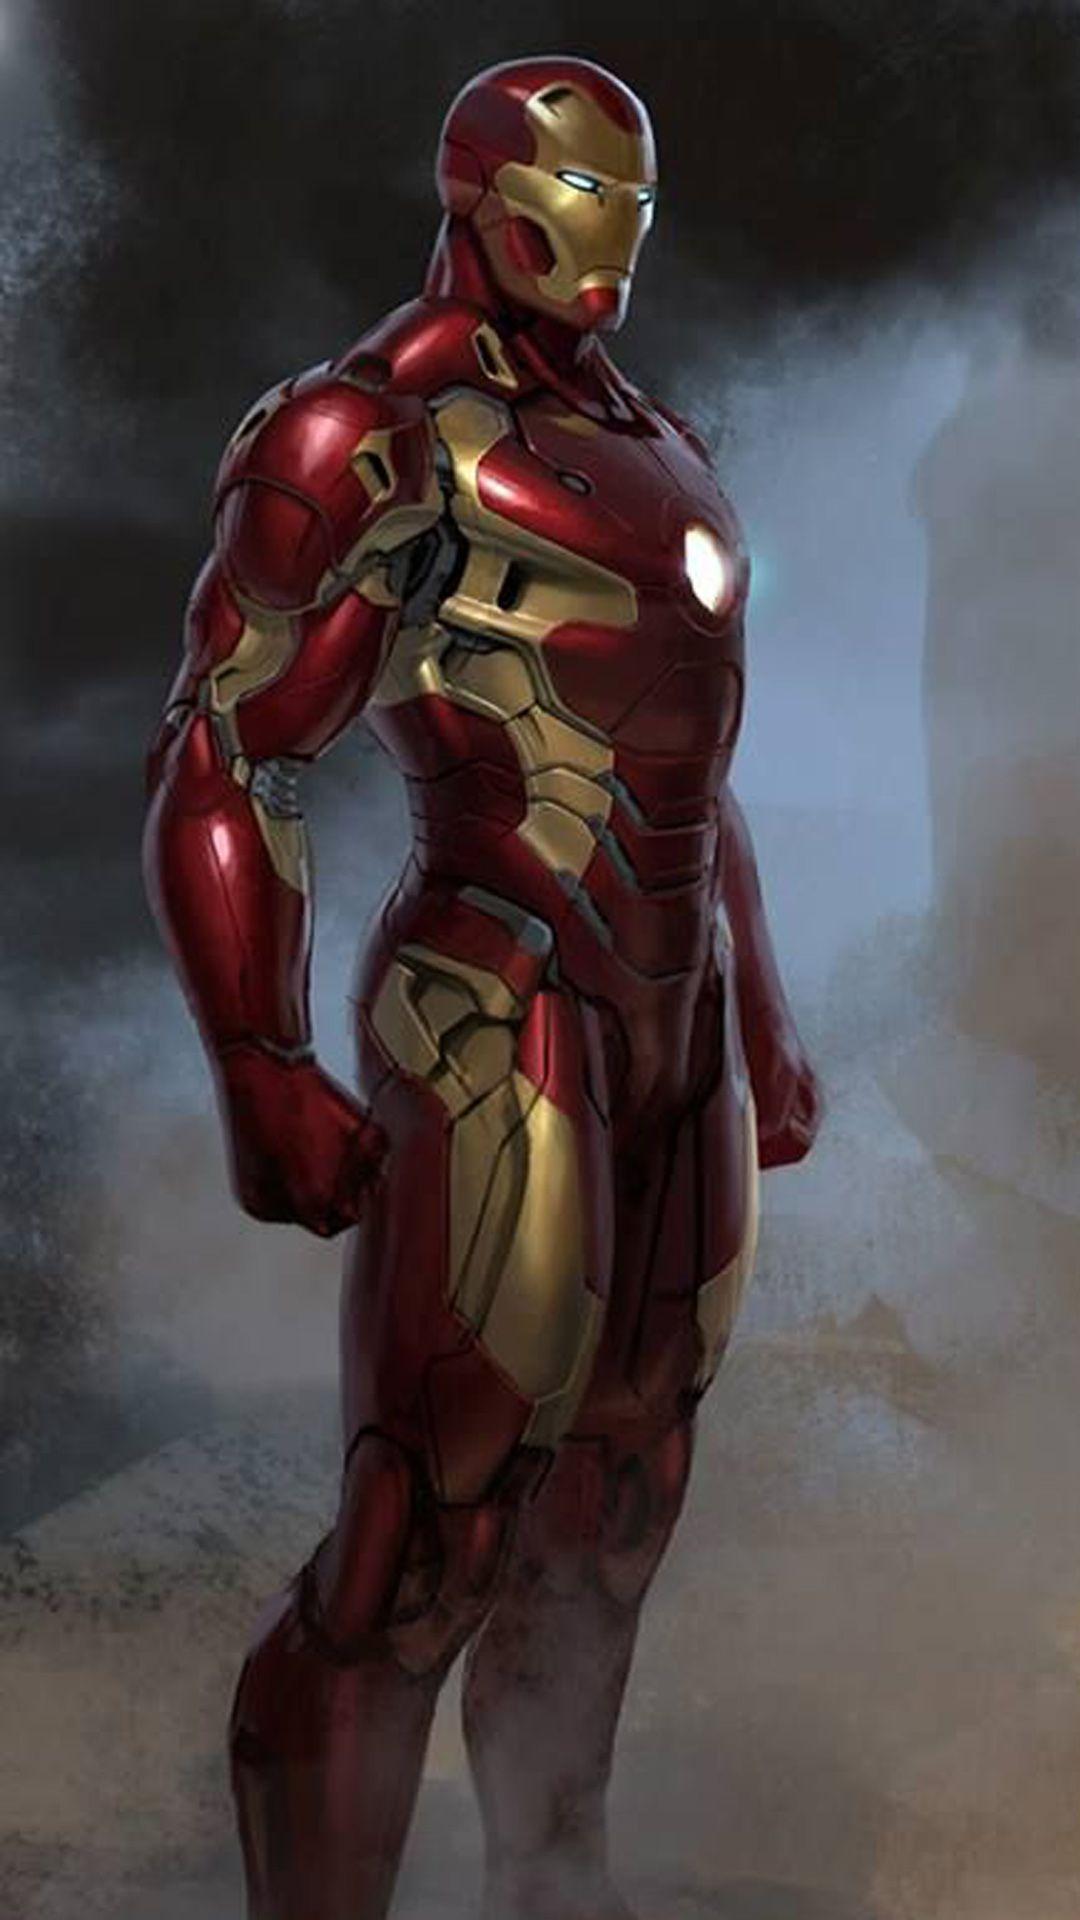 download the new version for iphoneIron Man 3